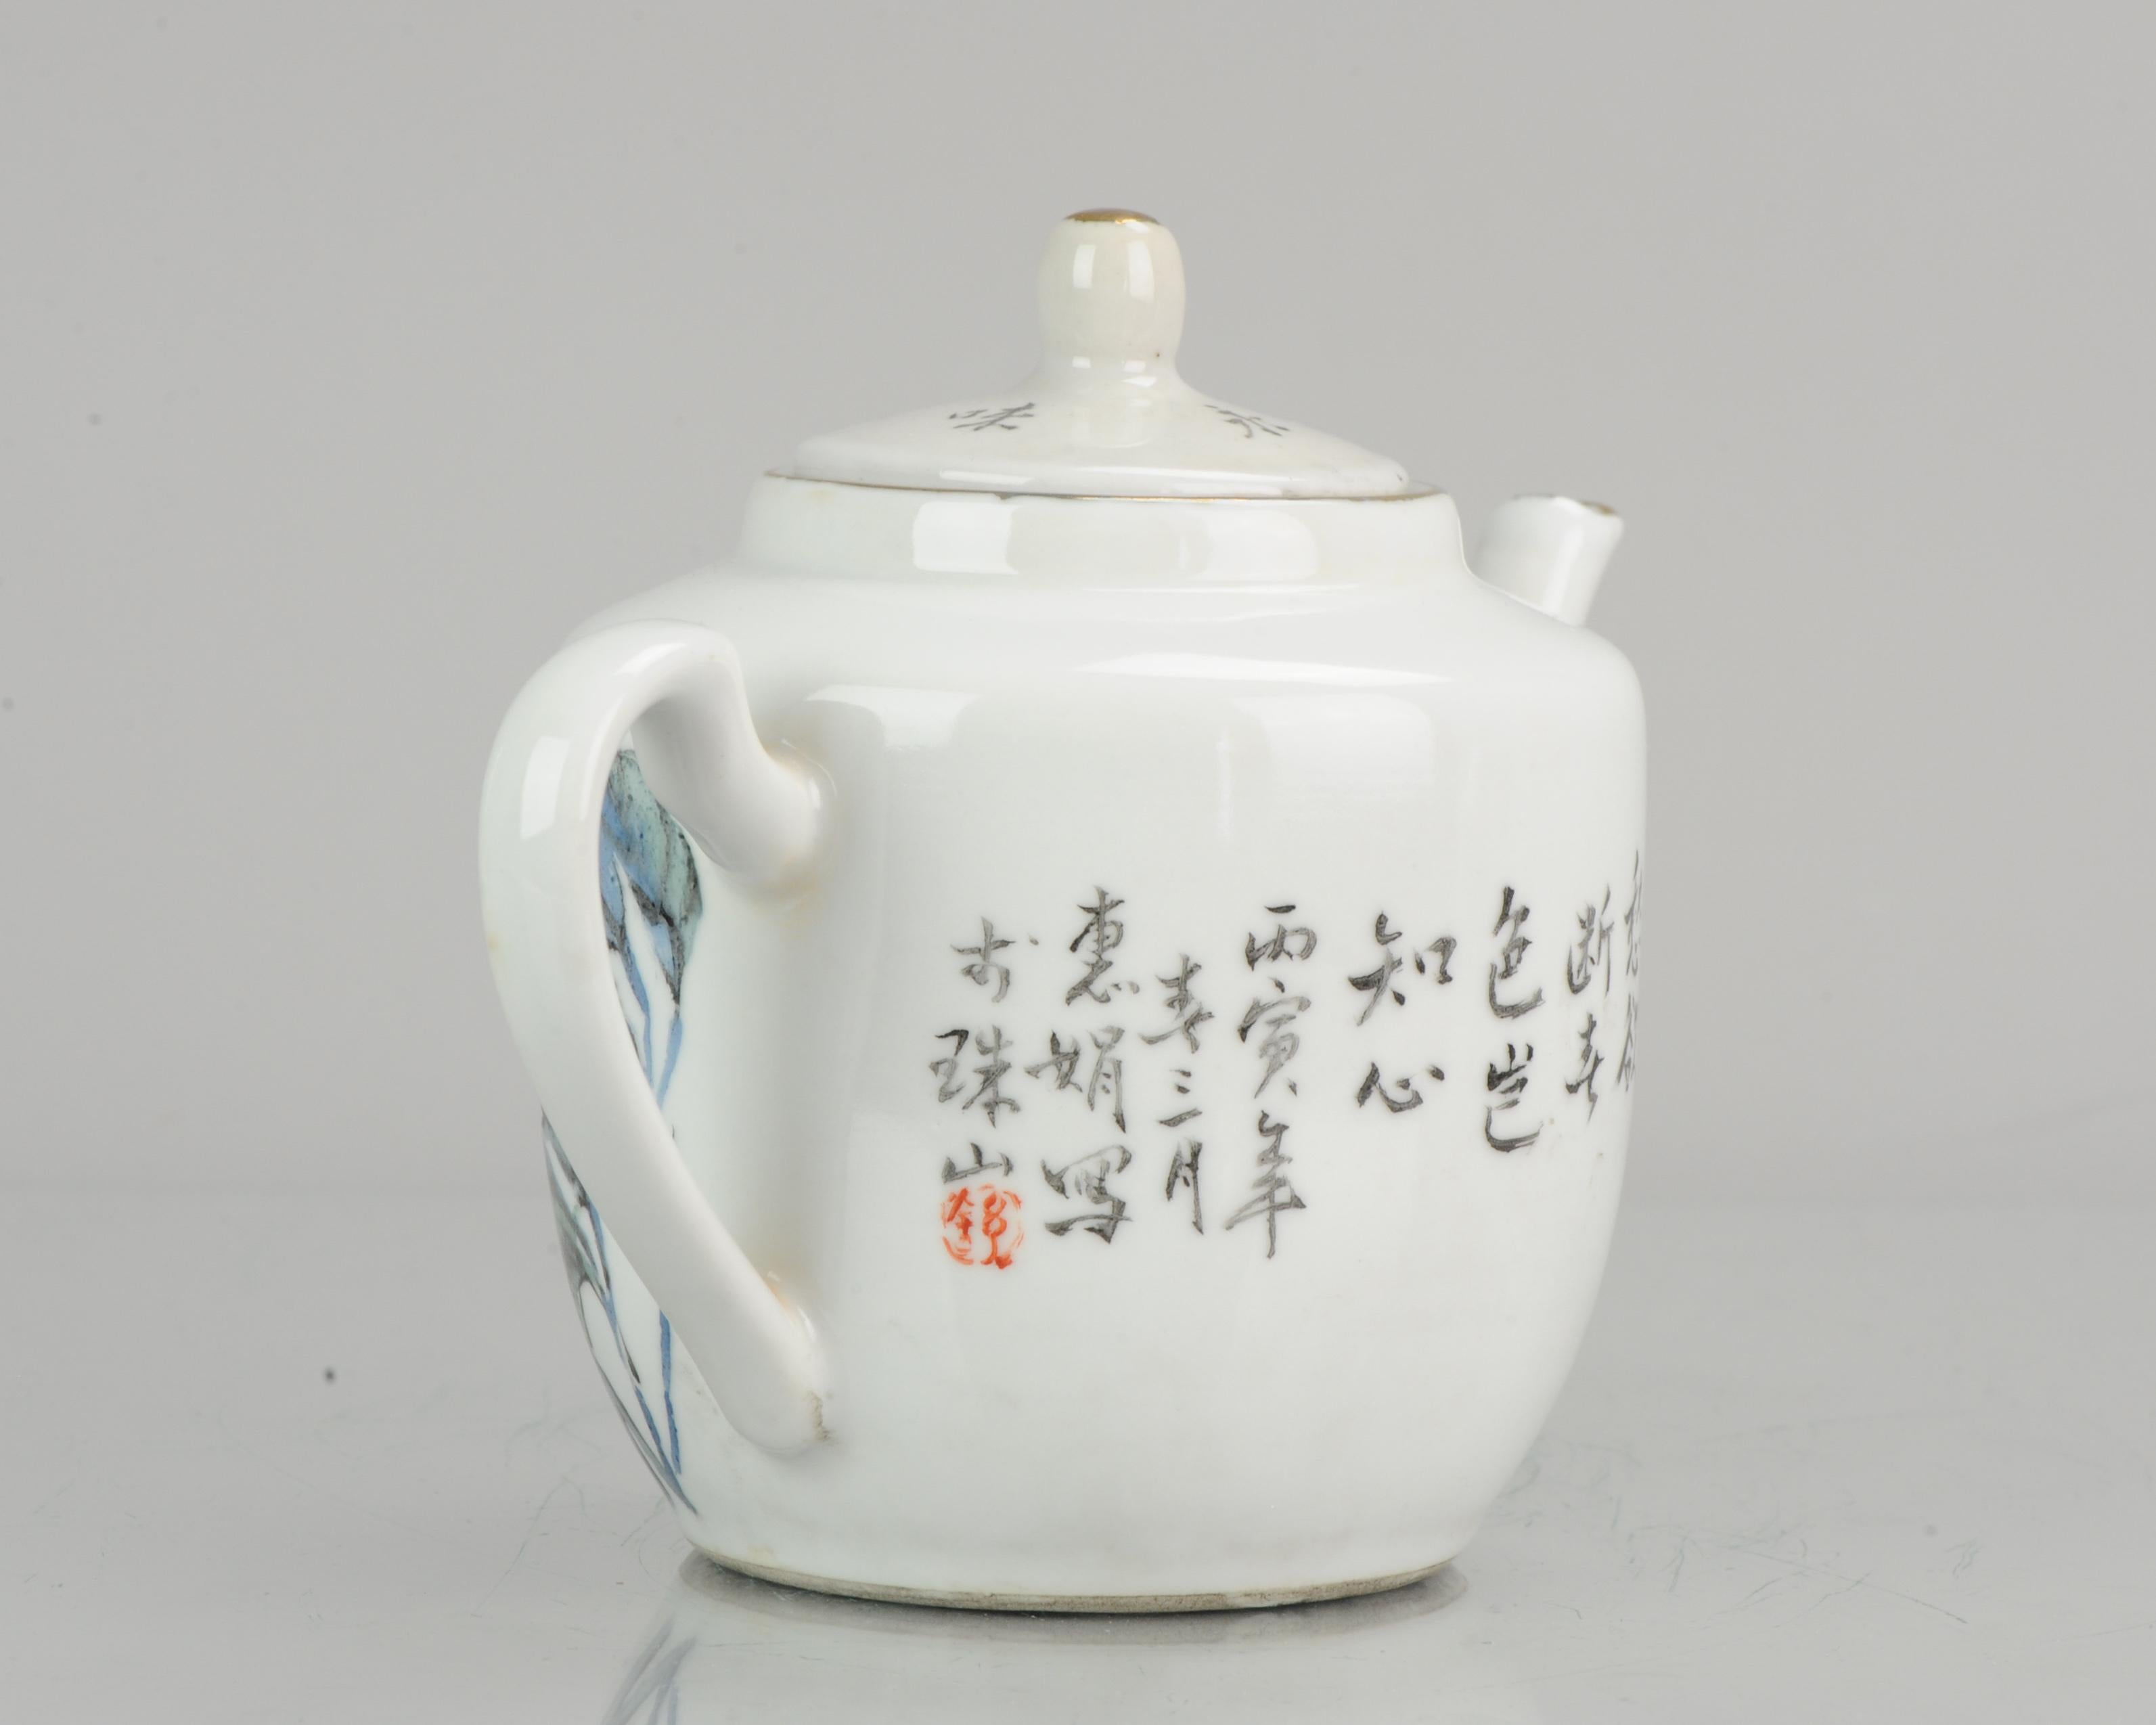 A very nicely made teapot. Late 20th century and of very nice quality. Very original in its artwork and painting.

Additional information:
Material: Porcelain & Pottery
Region of Origin: China
Period: 20th century PRoC (1949 - now)
Age: